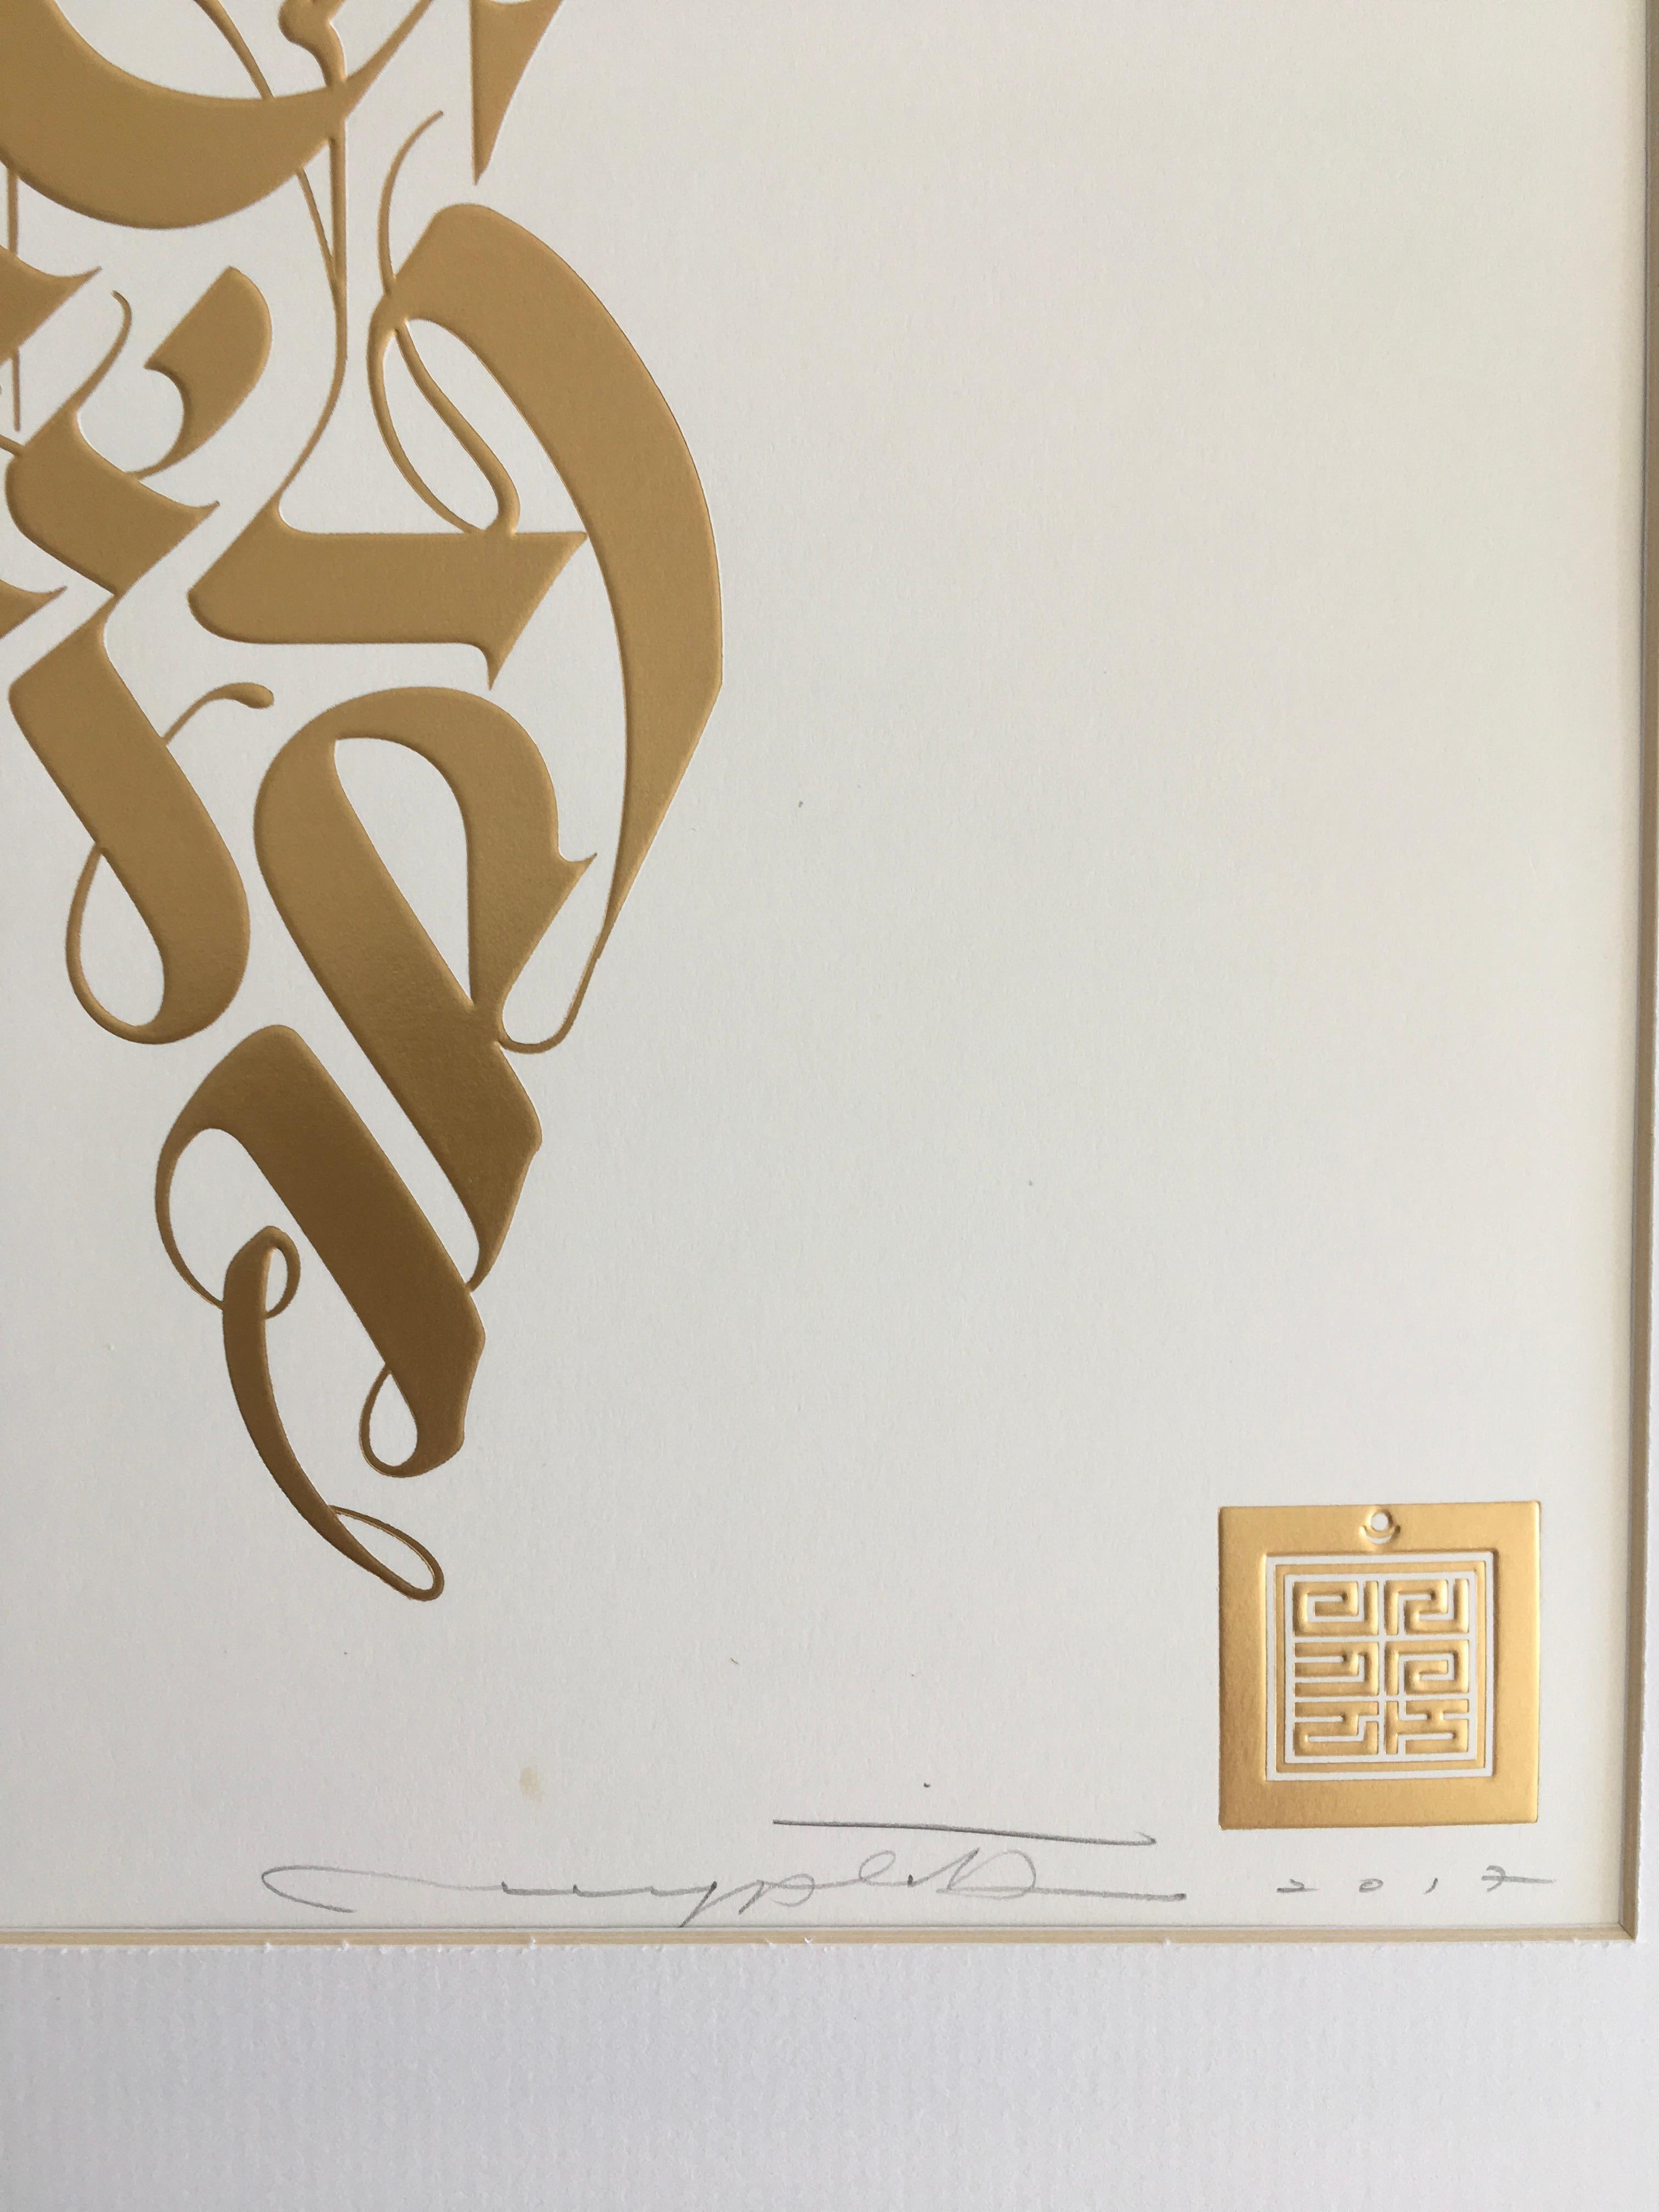 „Ahimsa White“ by Cryptik 
Embossed Gold Foil Stamping on 350gsm Natural White Paper
Size 48.3 × 35.6 cm
Signed and numbered (6/60), in pencil along lower edge

Cryptik is a Los Angeles based artist who creates from a palette of wonder, where all